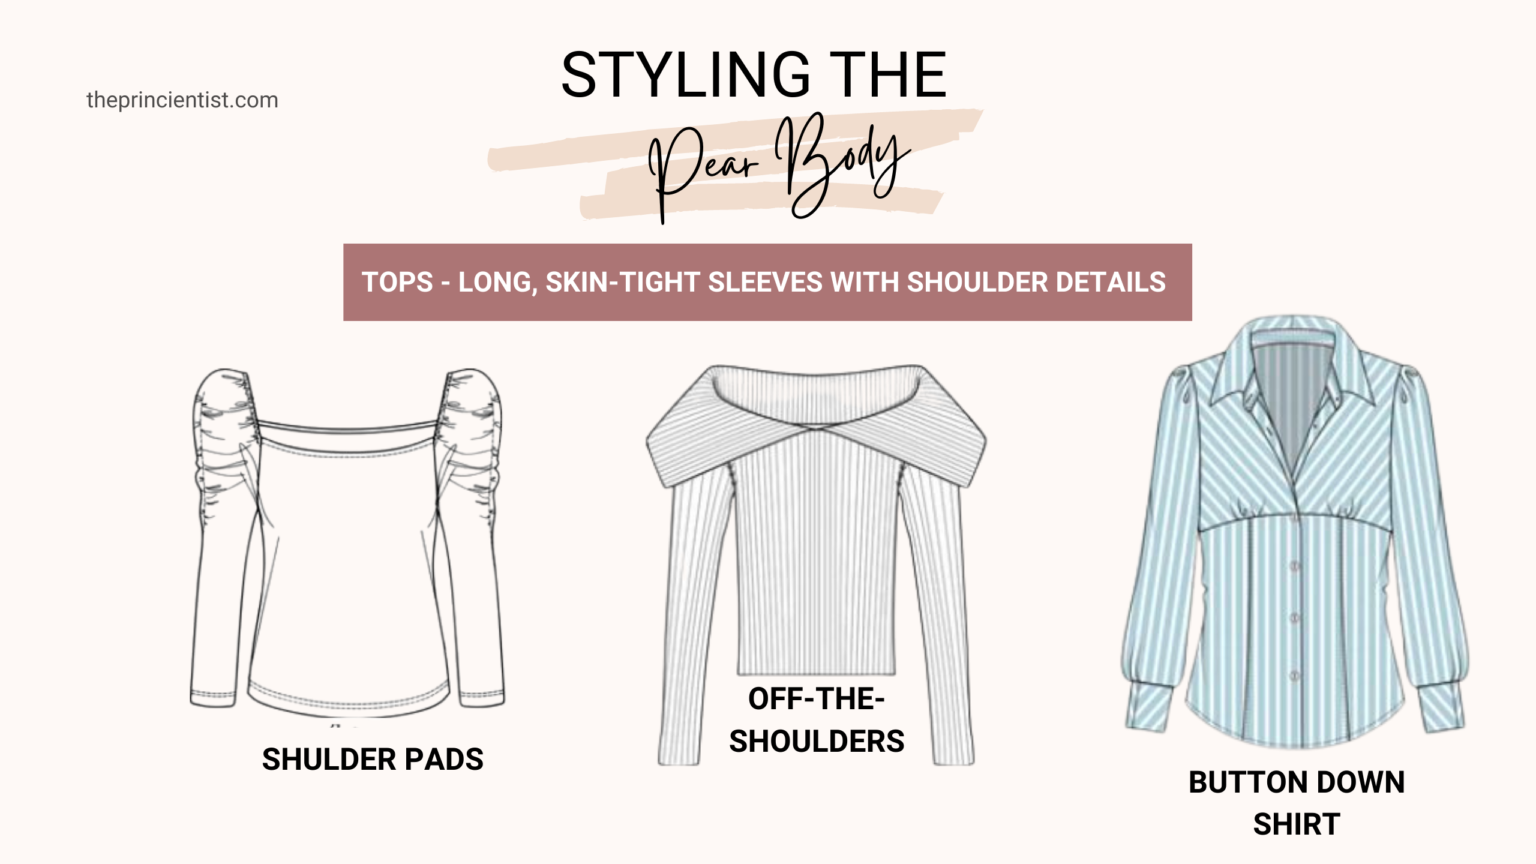 how to dress the pear shaped body -tops for the pear body 4 - long, skin-tigth sleeves with shoulder details